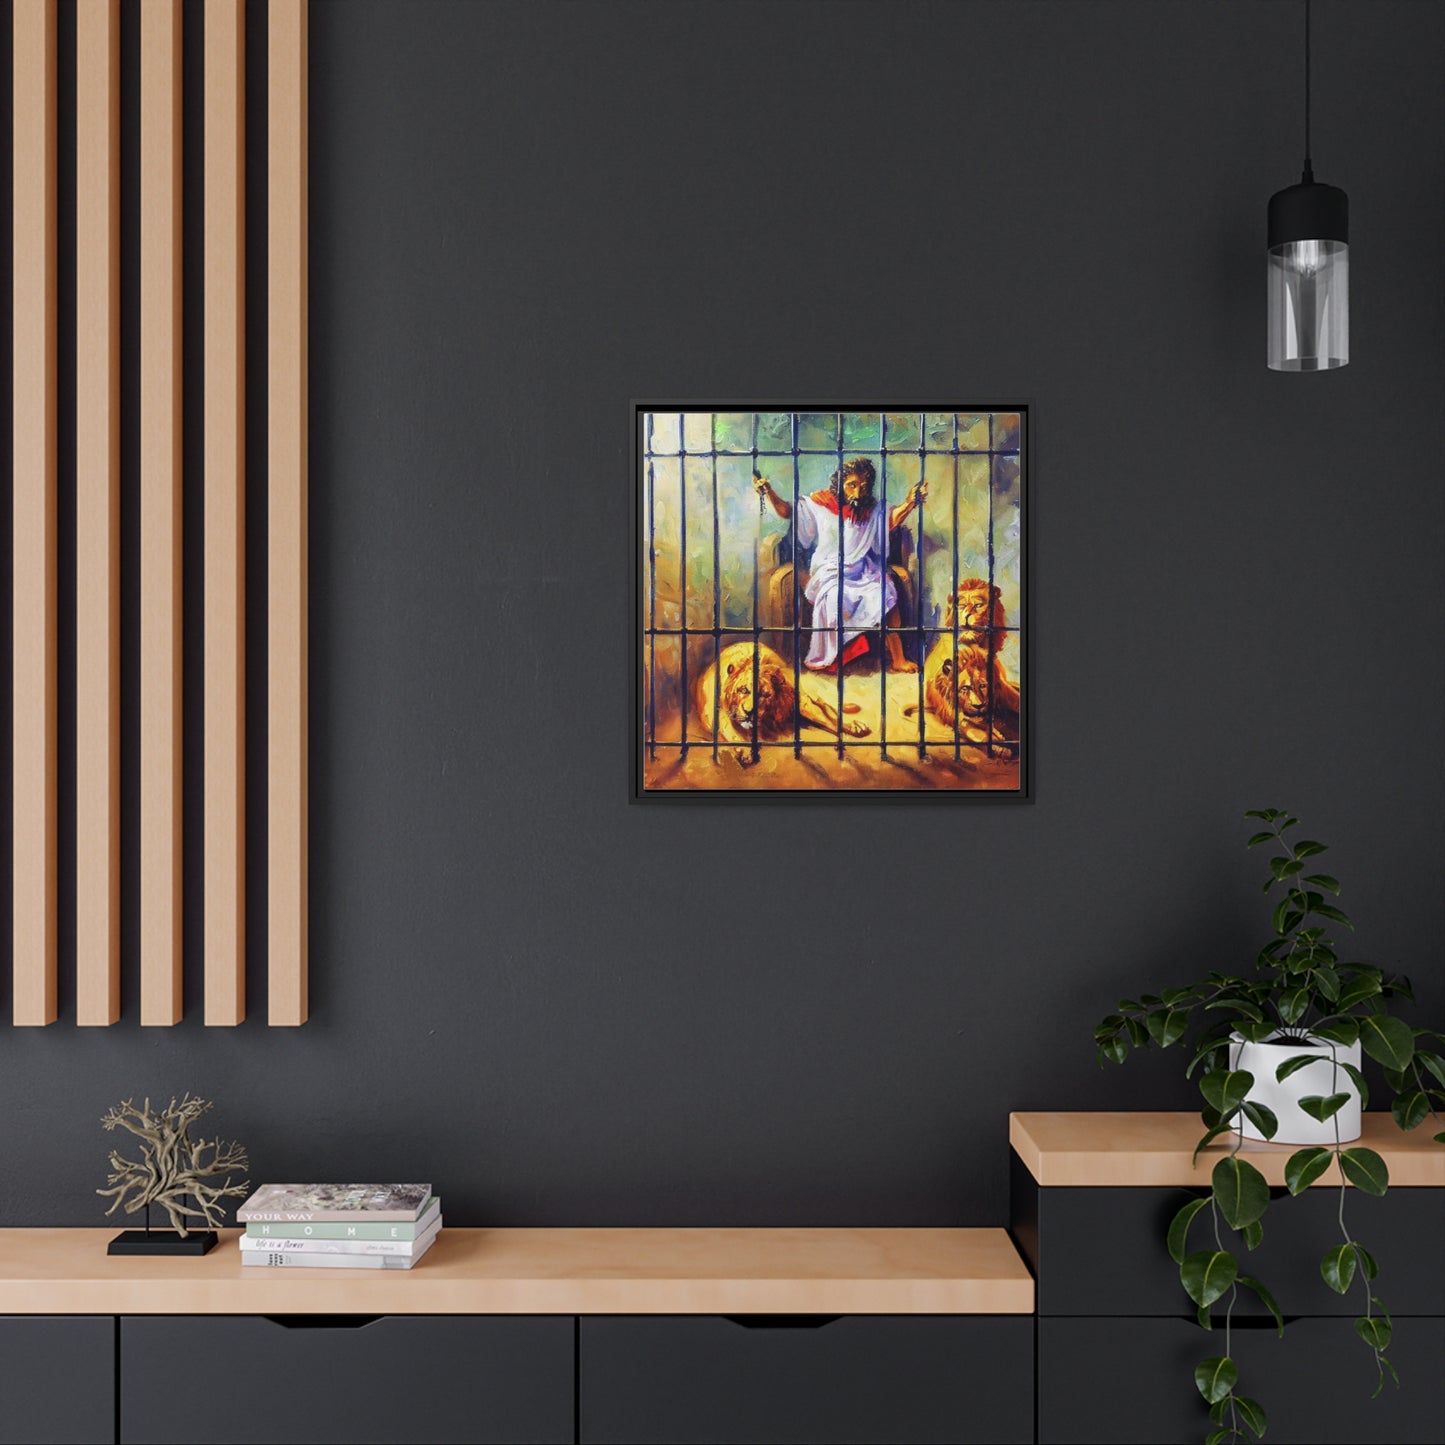 Art-of-Apparel - Daniel and the Lions - Framed Black Canvas Art Gift Items - Matte